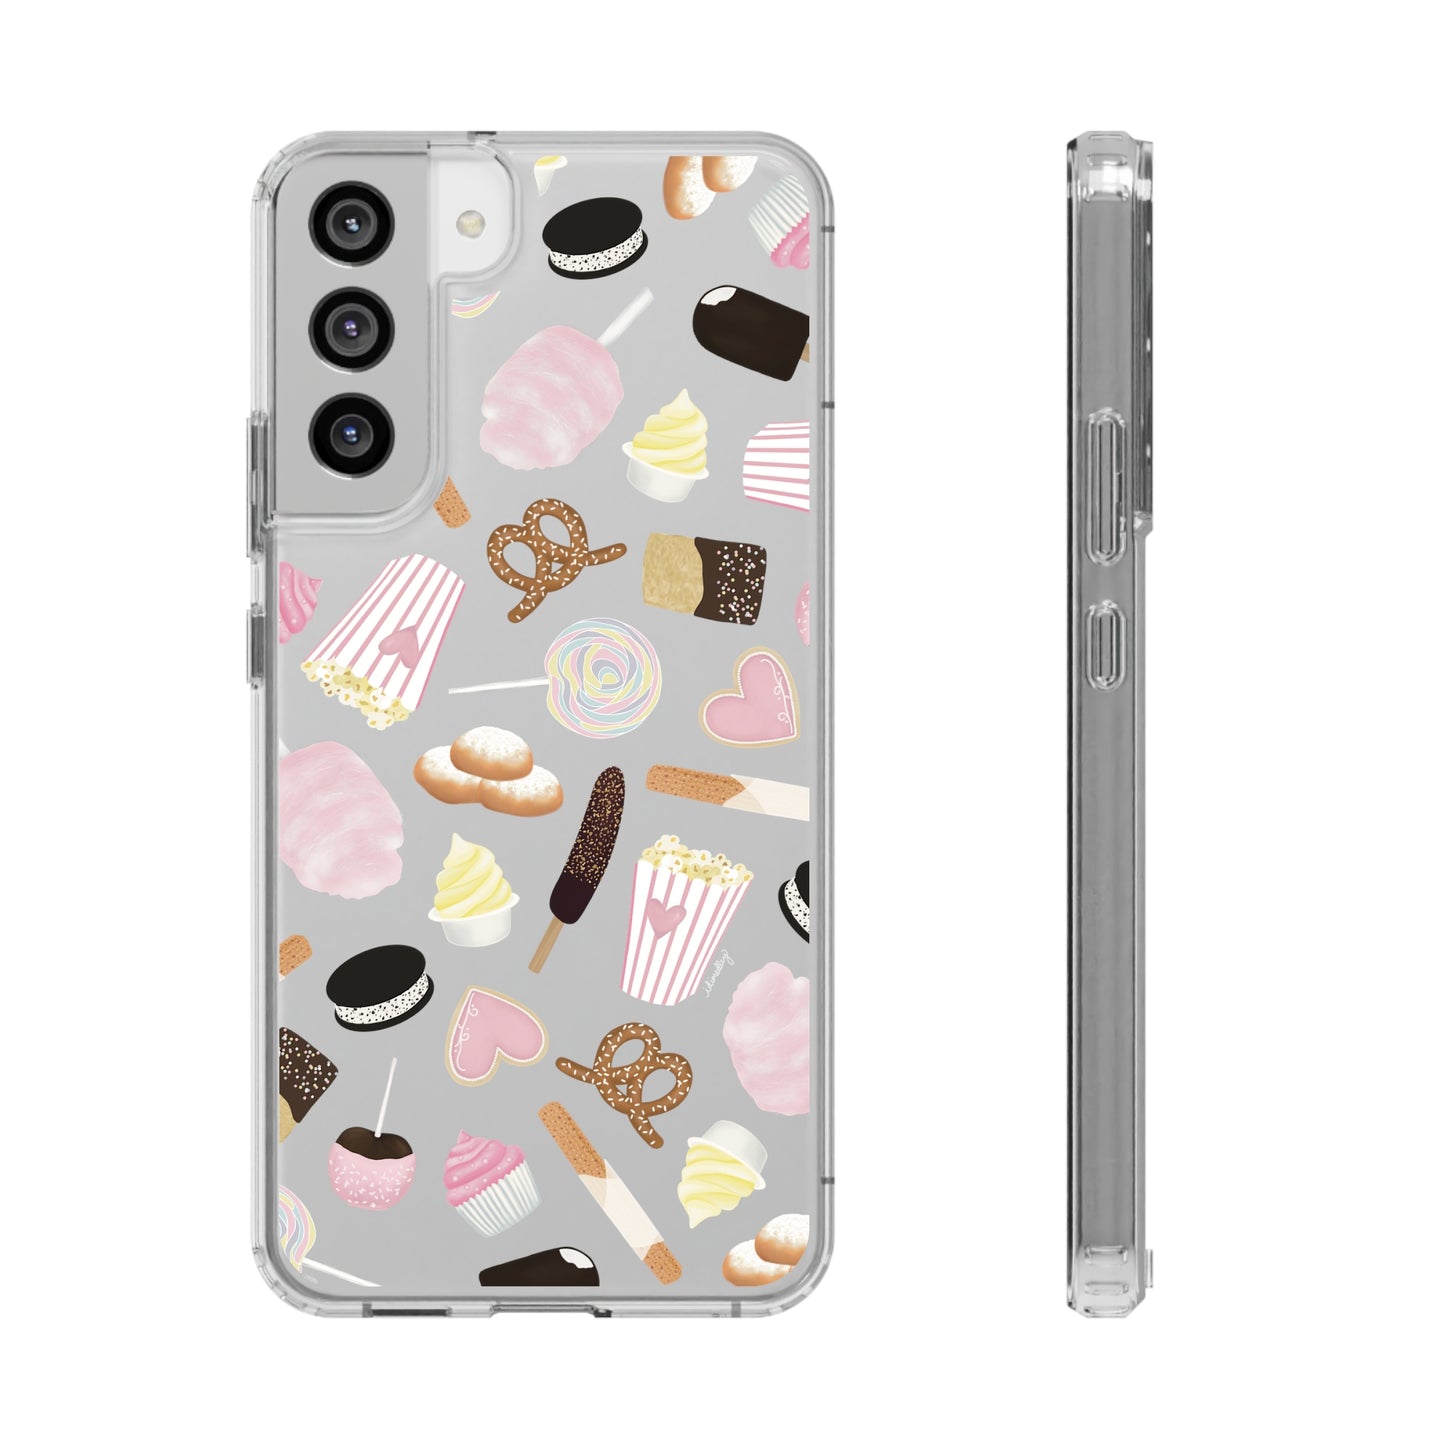 Happiest Snacks CLEAR Case